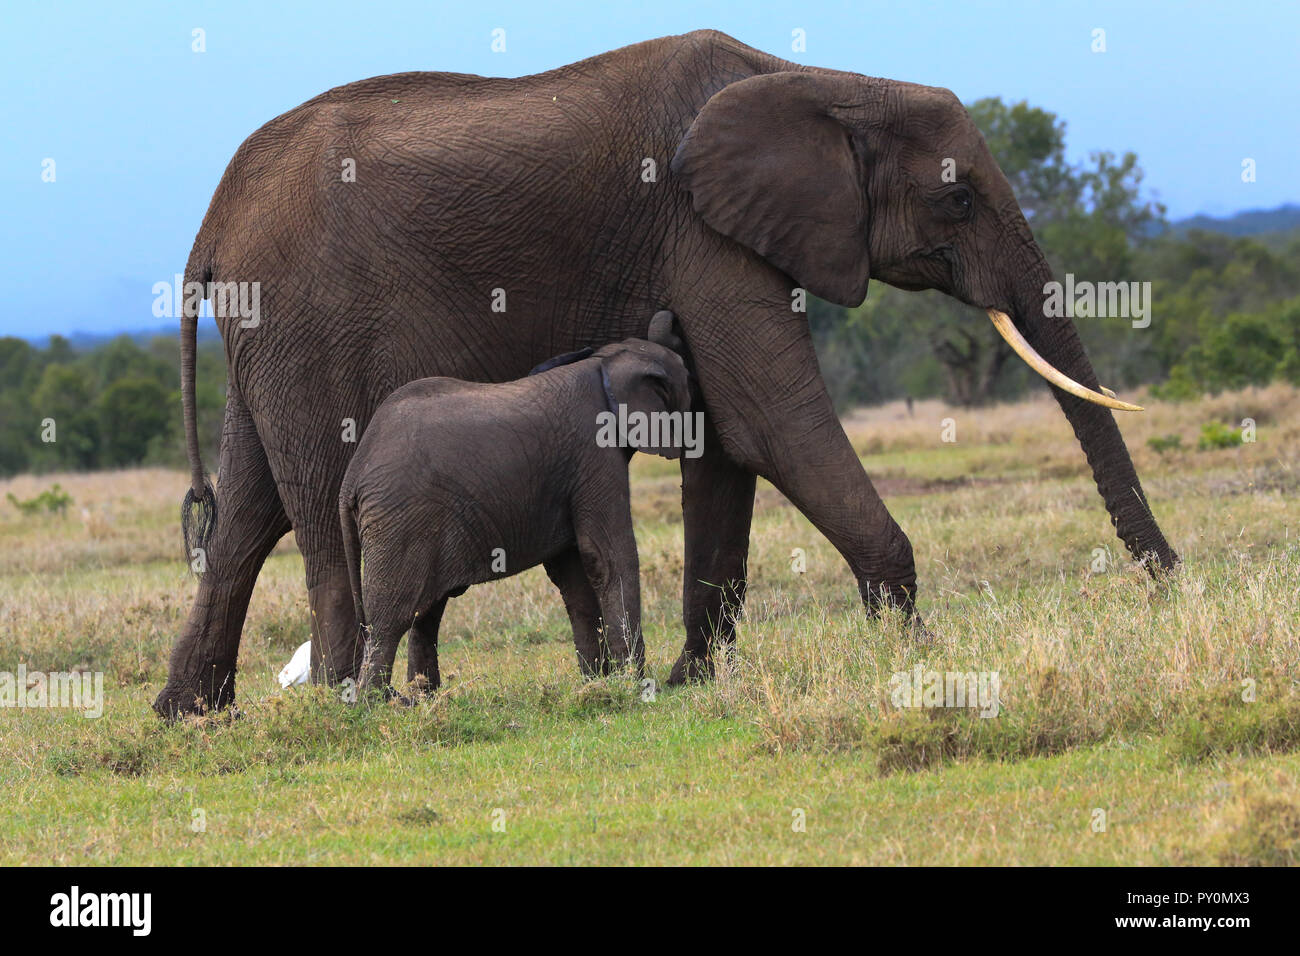 An elephant nursing its baby at the Ol Pejeta Conservancy in Laikipia County, Kenya. Safari tour from the Sweetwaters Tented Camp. Stock Photo